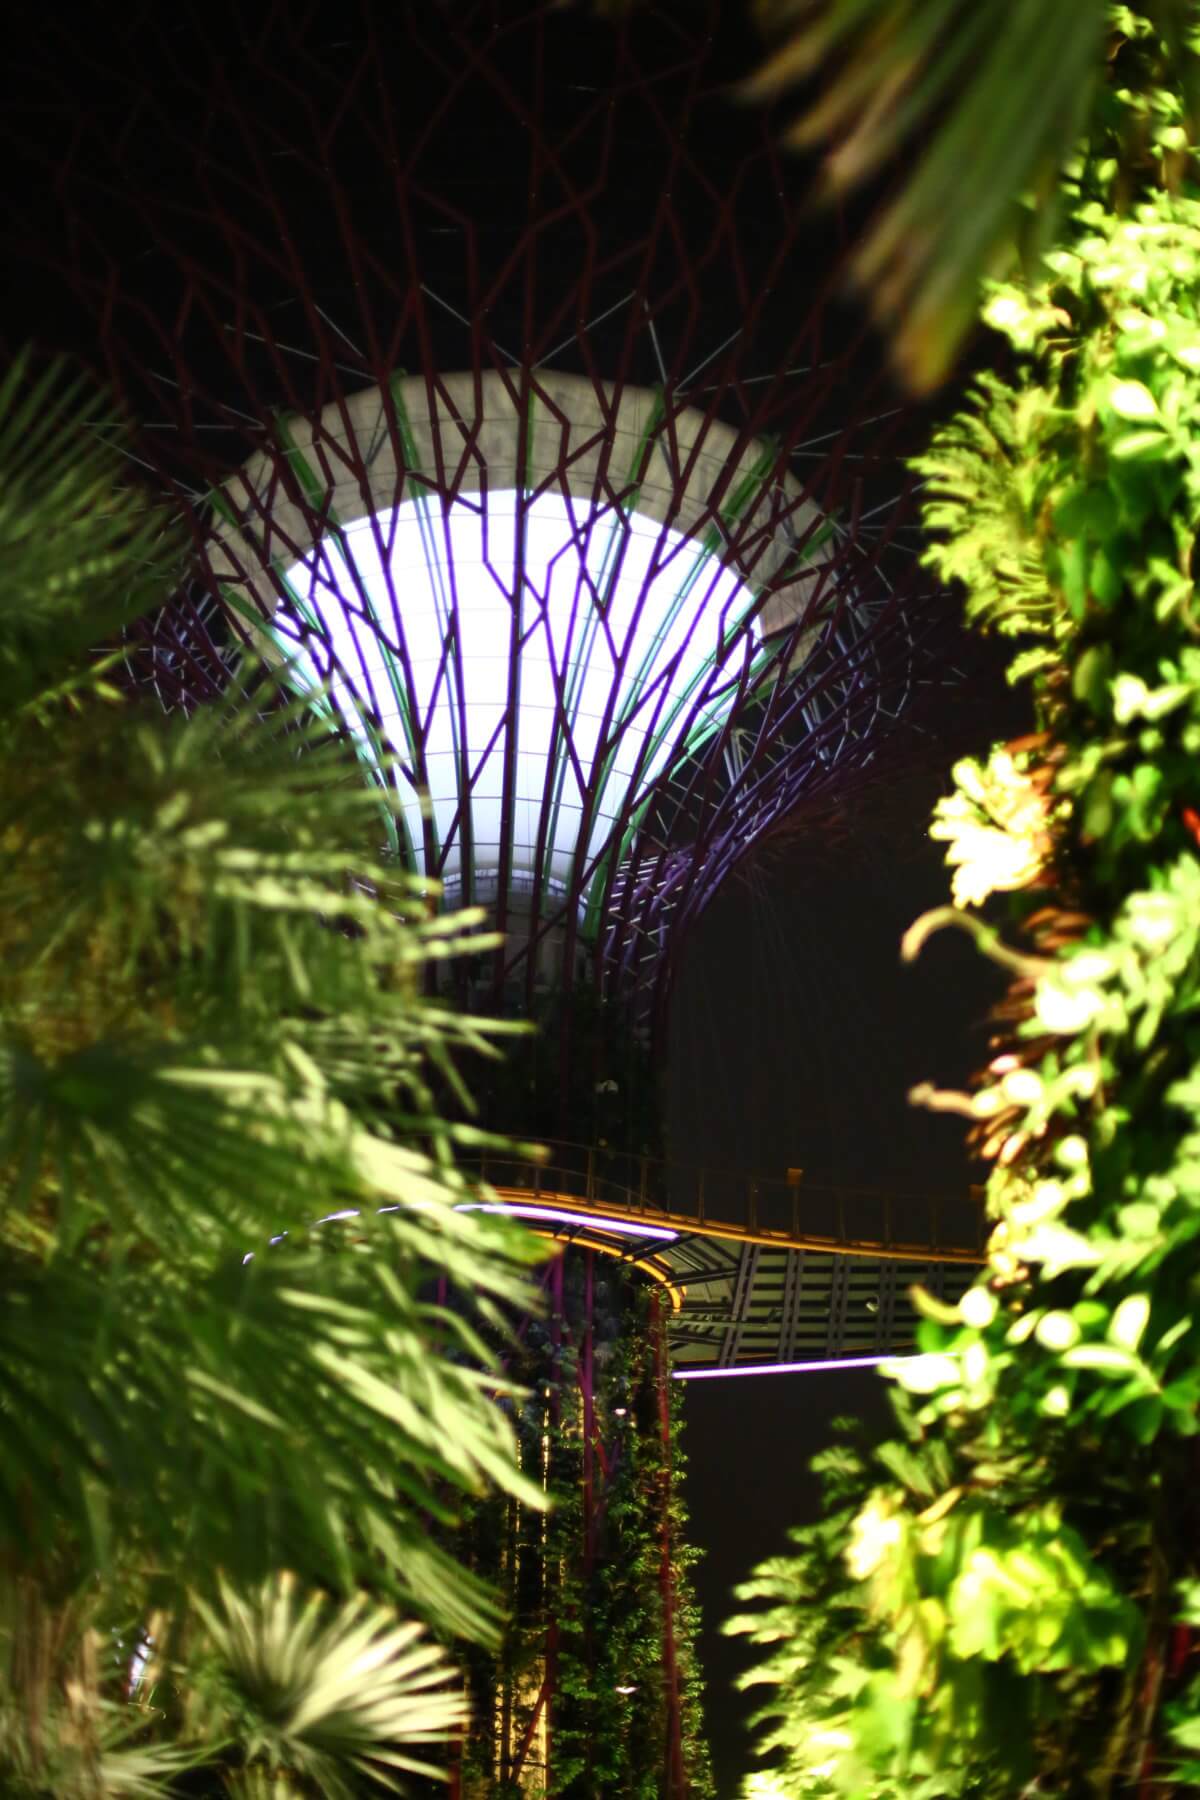 Singapore Garden by the bay